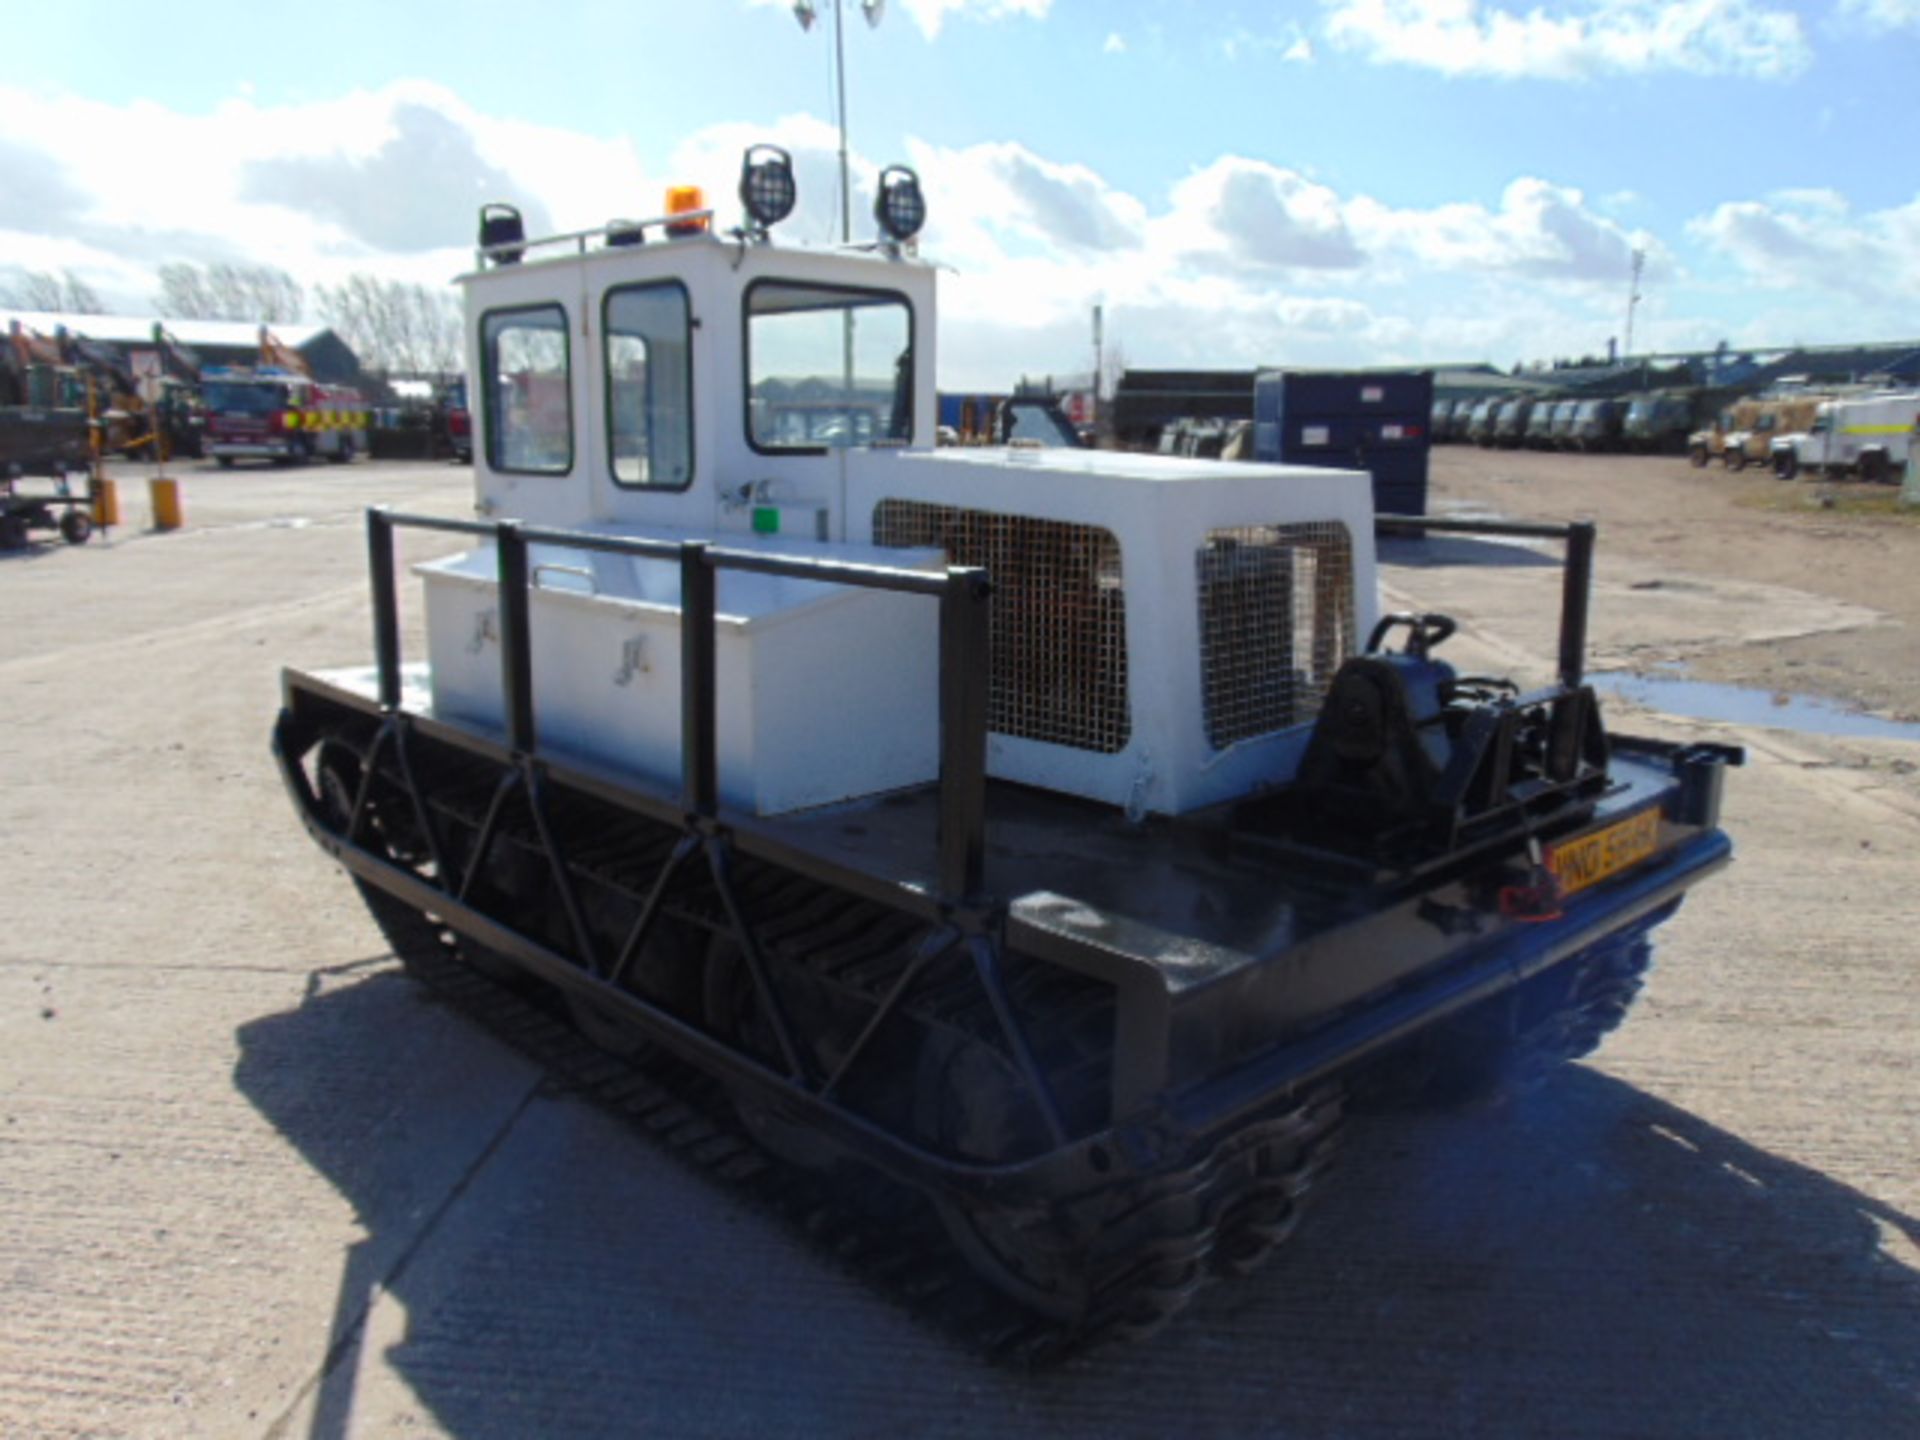 Rolba Bombardier Muskeg MM 80 All Terrain Tracked Vehicle with Rear Mounted Boughton Winch - Image 5 of 32